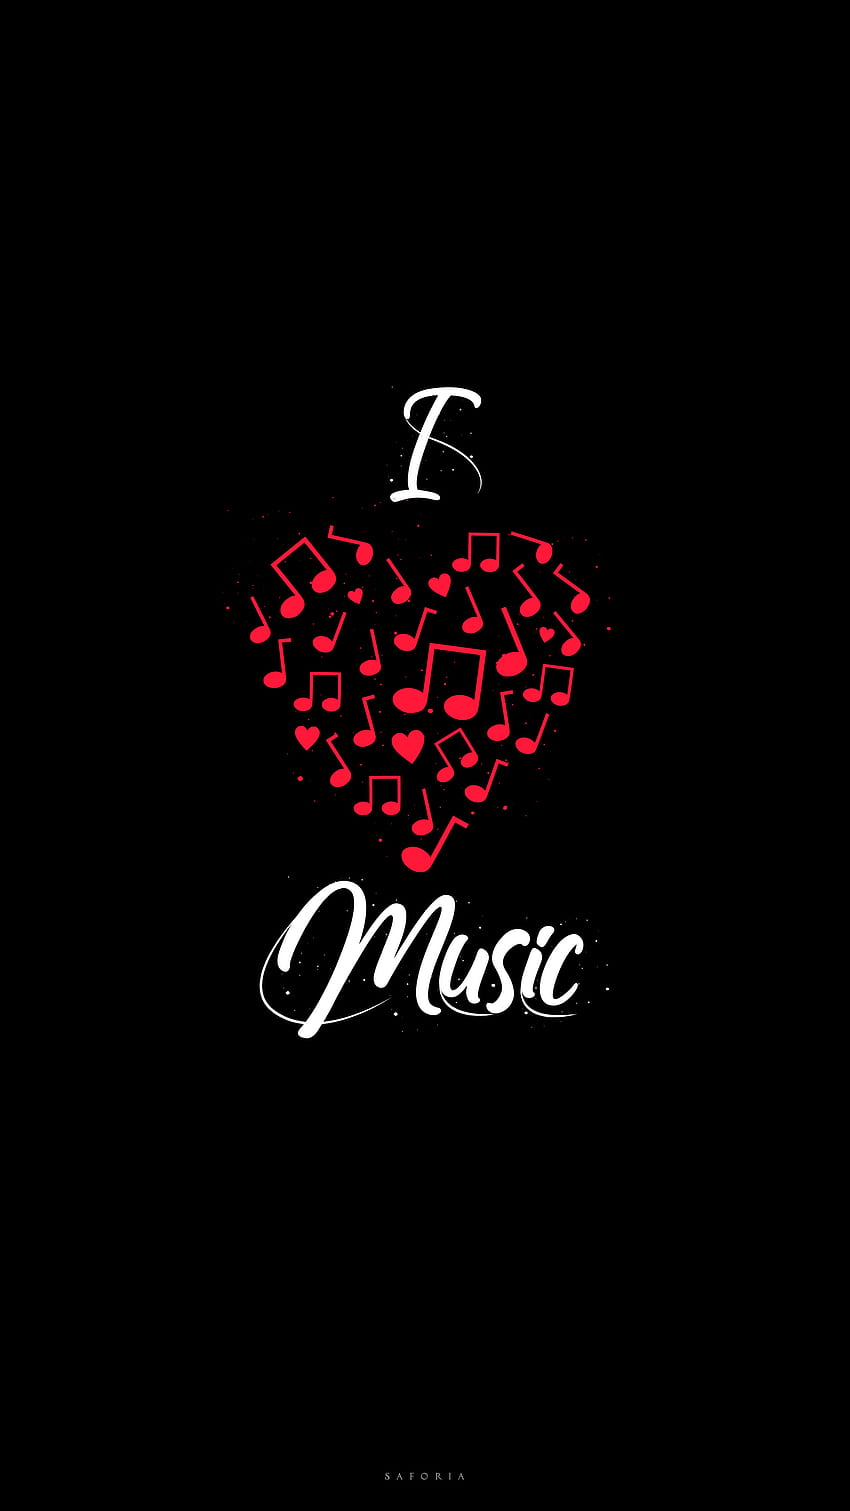 music , Heart, Red, iphone wallpapesr, Png, Cool, Fonts, Black, music , black HD phone wallpaper